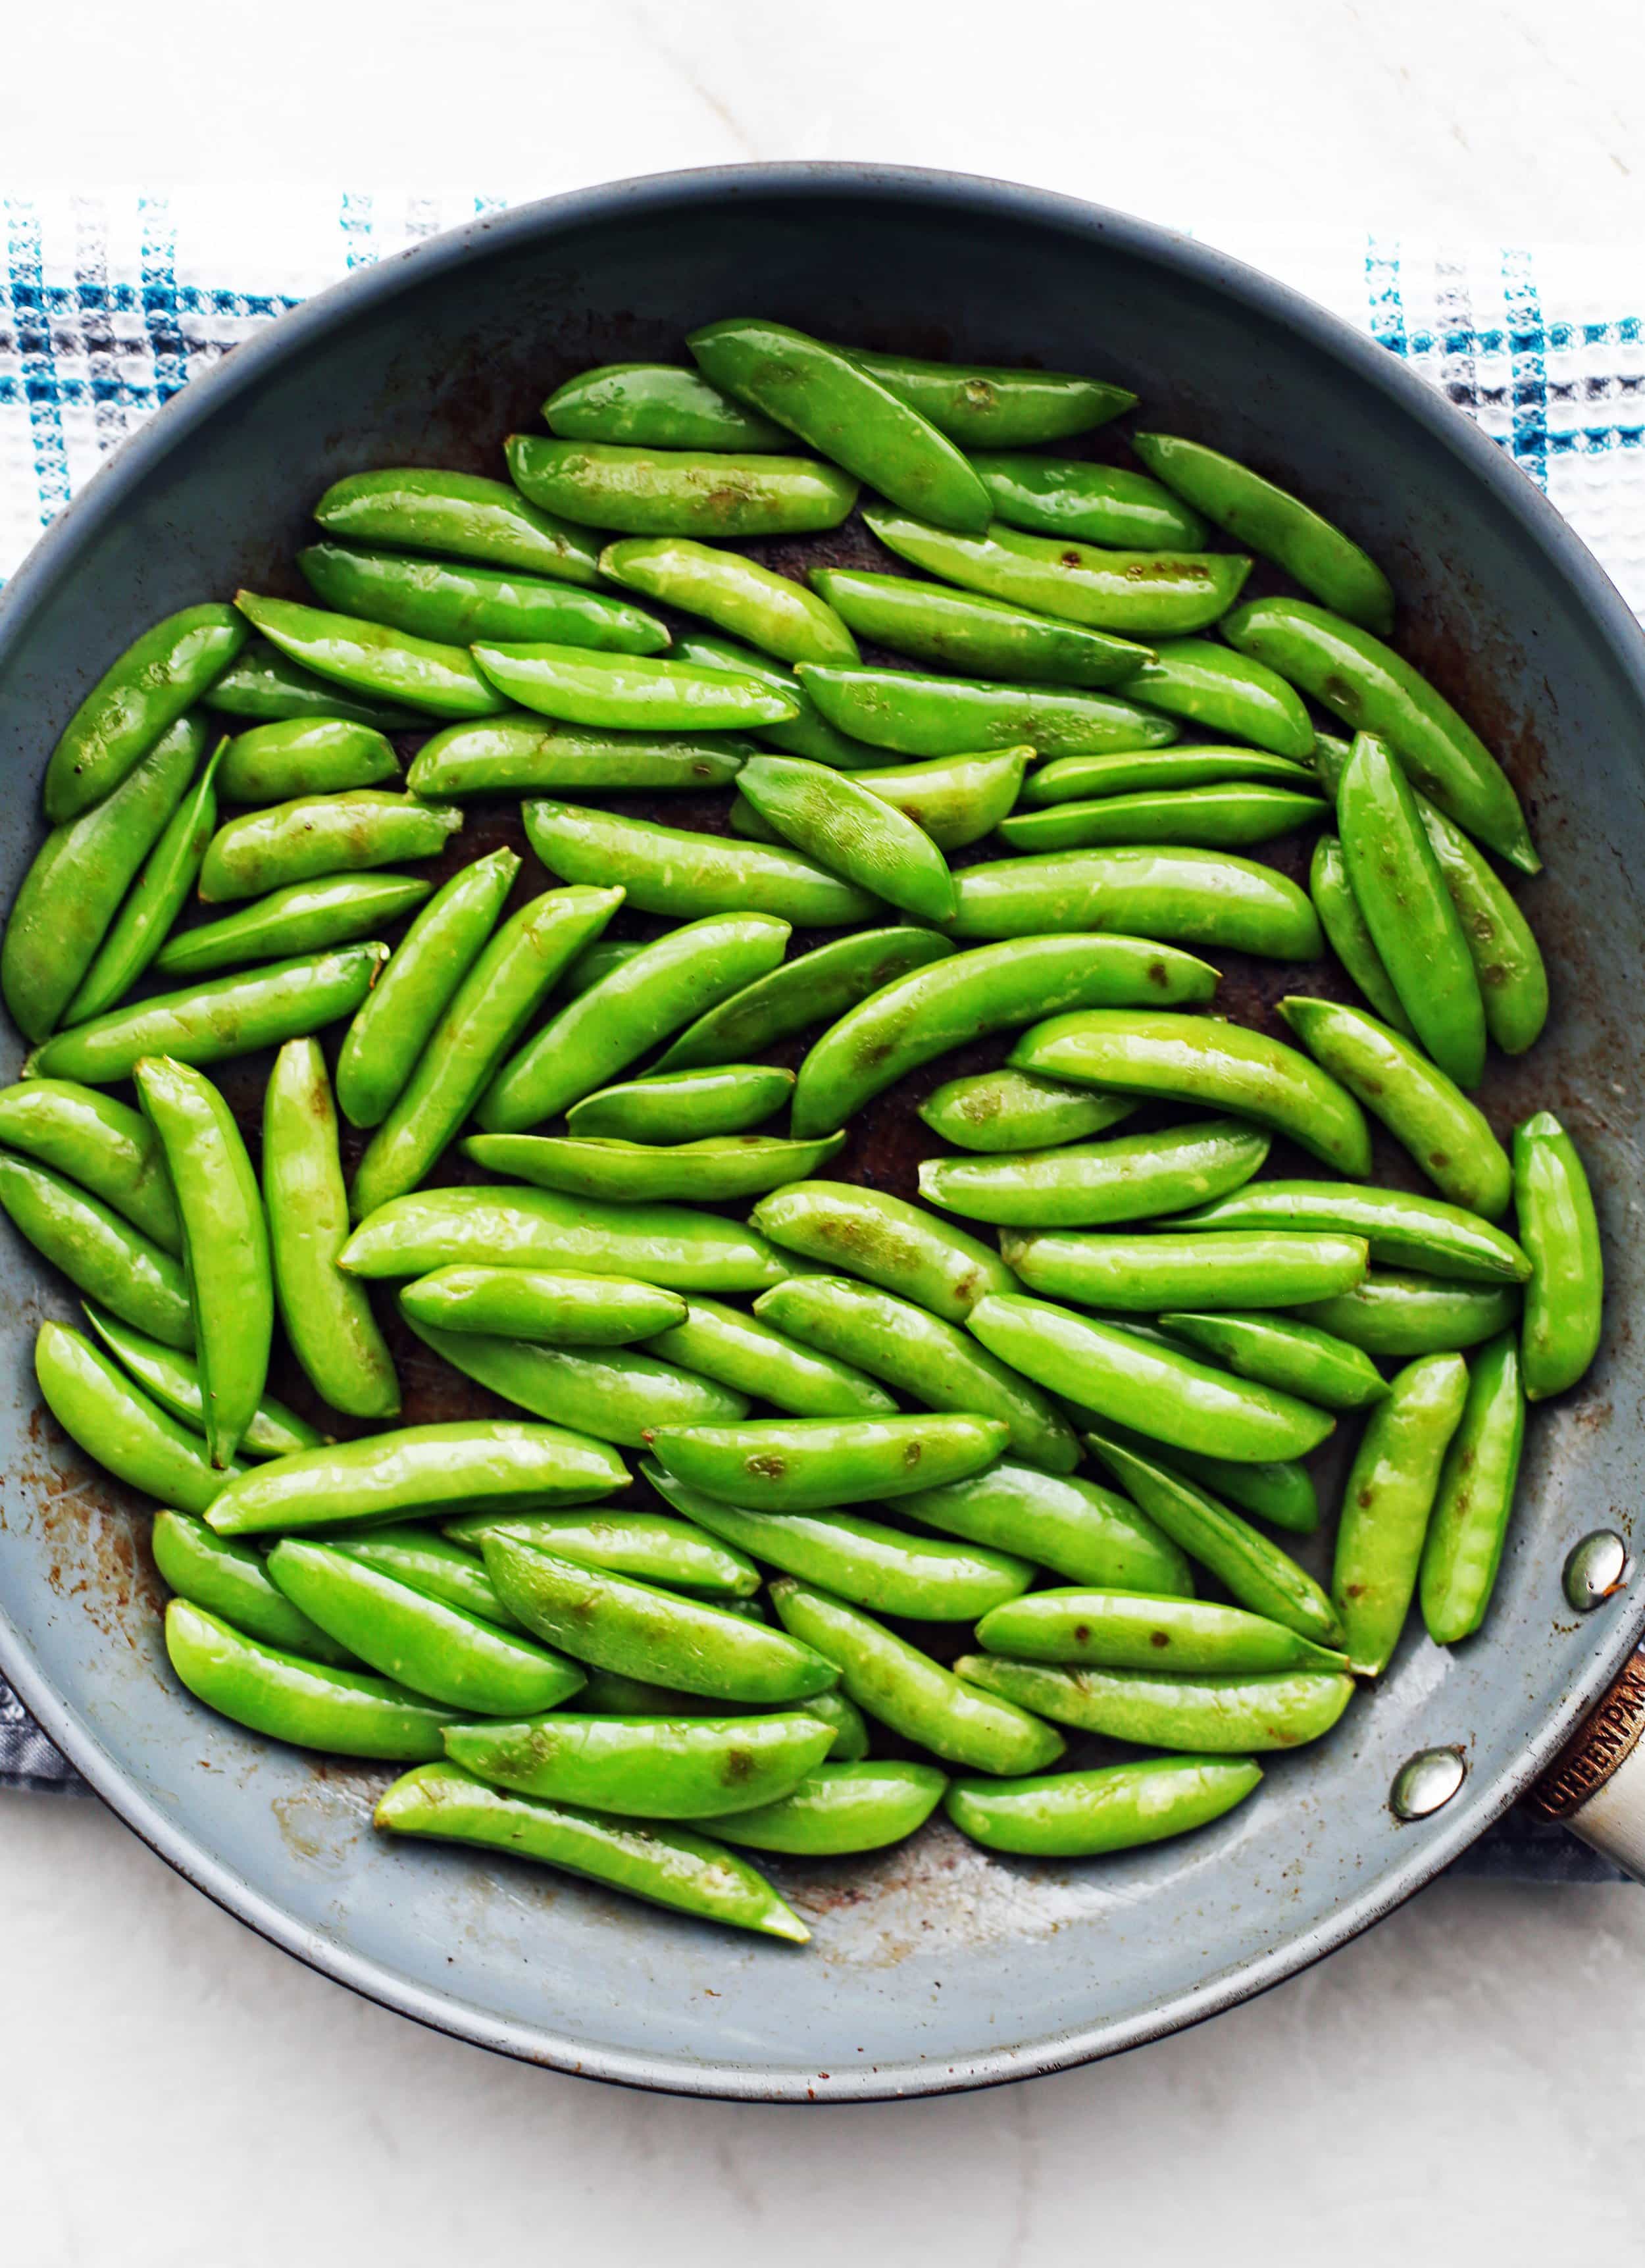 Sauteed sugar snap peas in a blue frying pan.